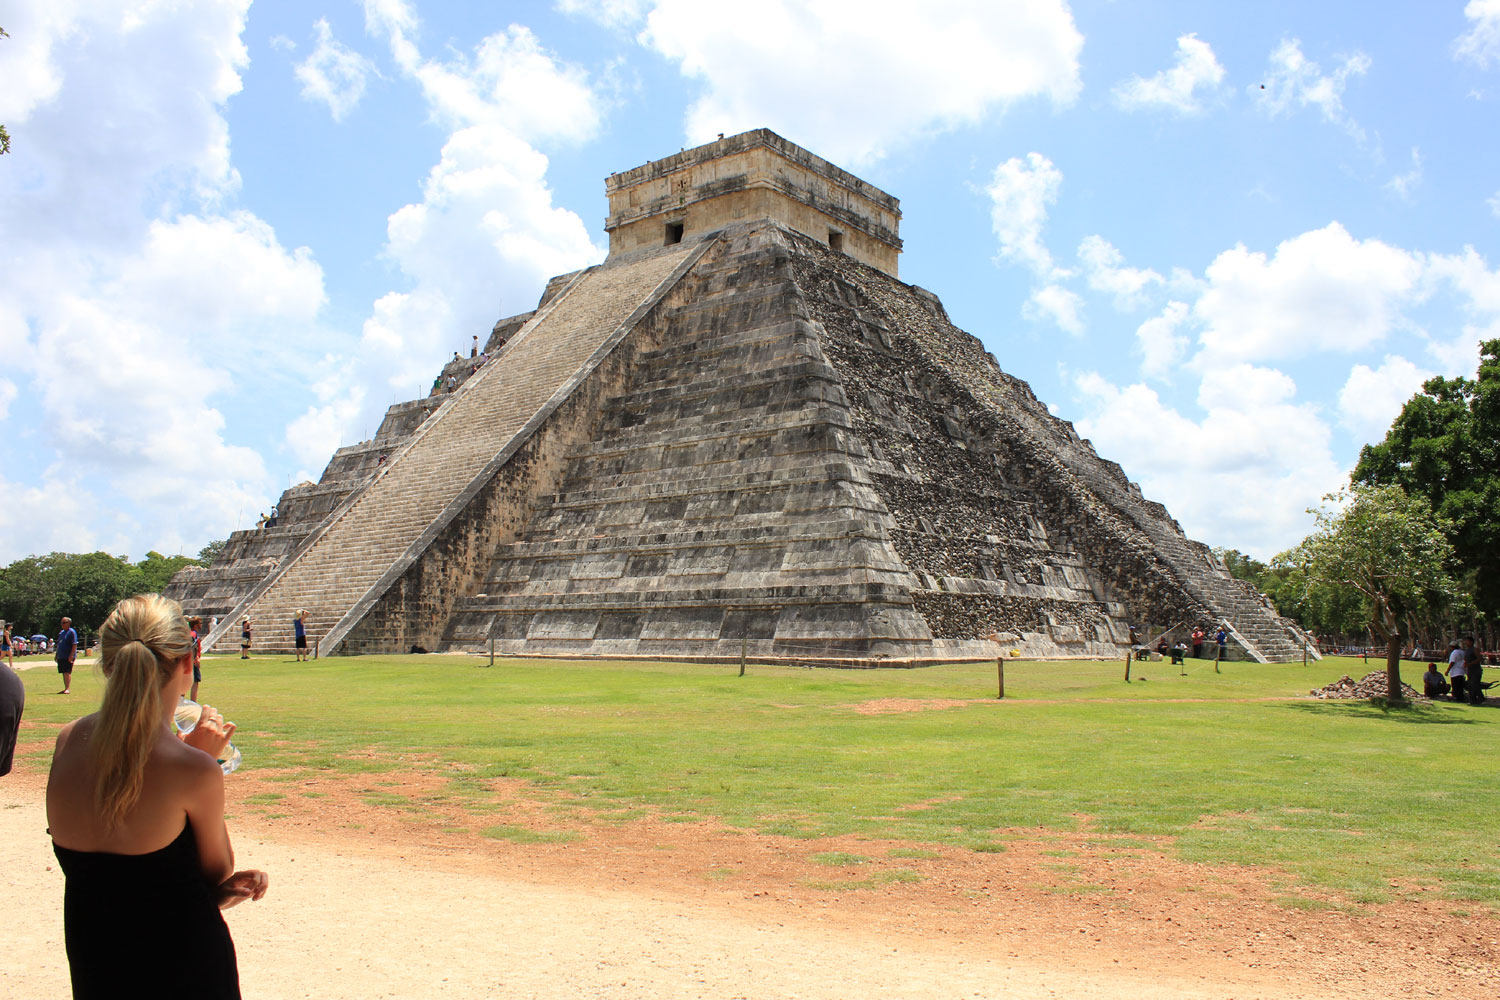 Tourist attractions in Mexico: things to do